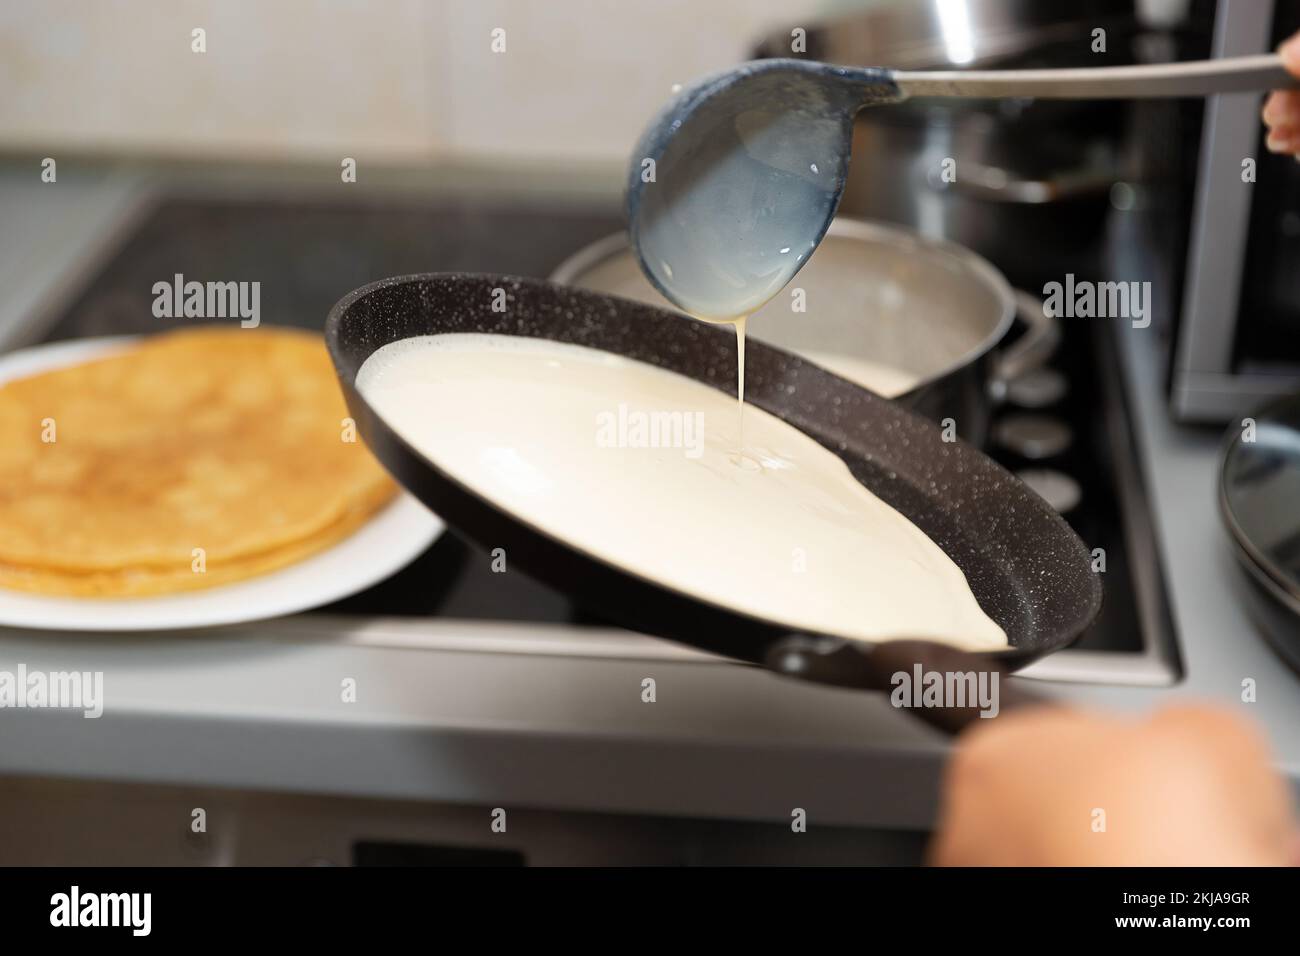 The process of cooking pancakes at home Stock Photo